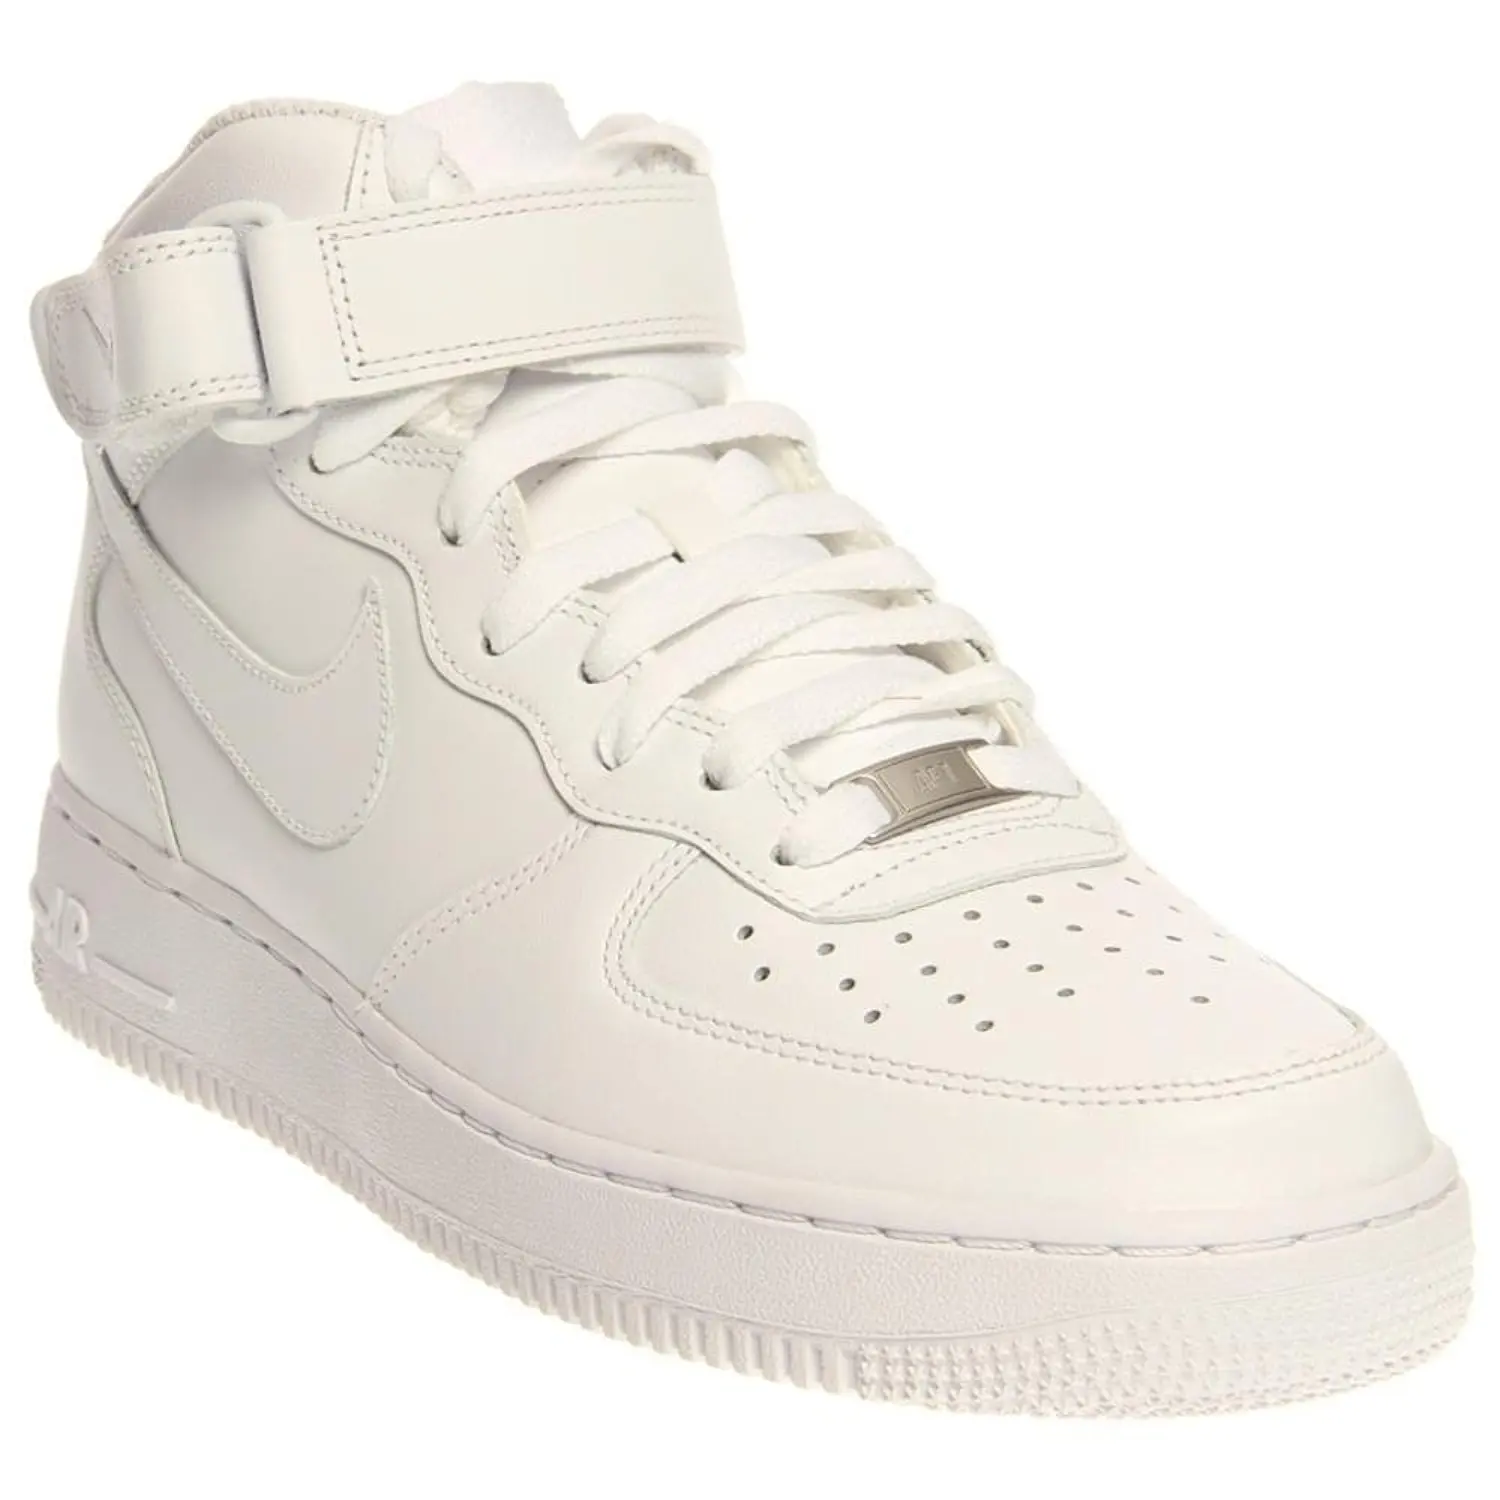 air force 1 size 8.5 mens